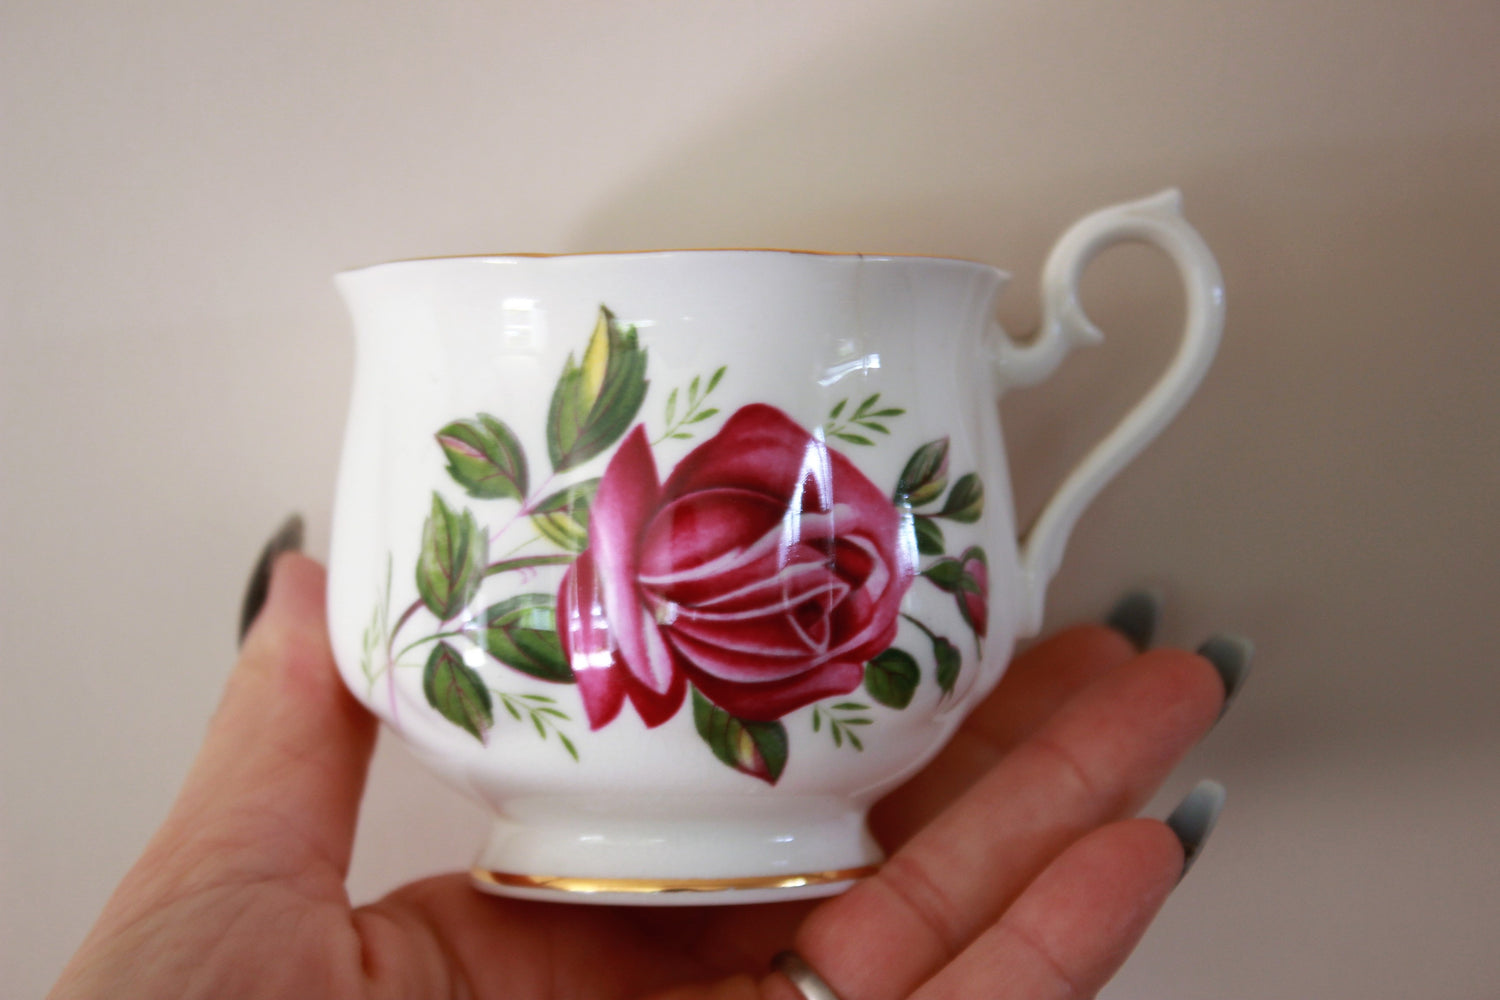 Vintage Royal Albert China Tea Cup and Saucer with Pink Roses